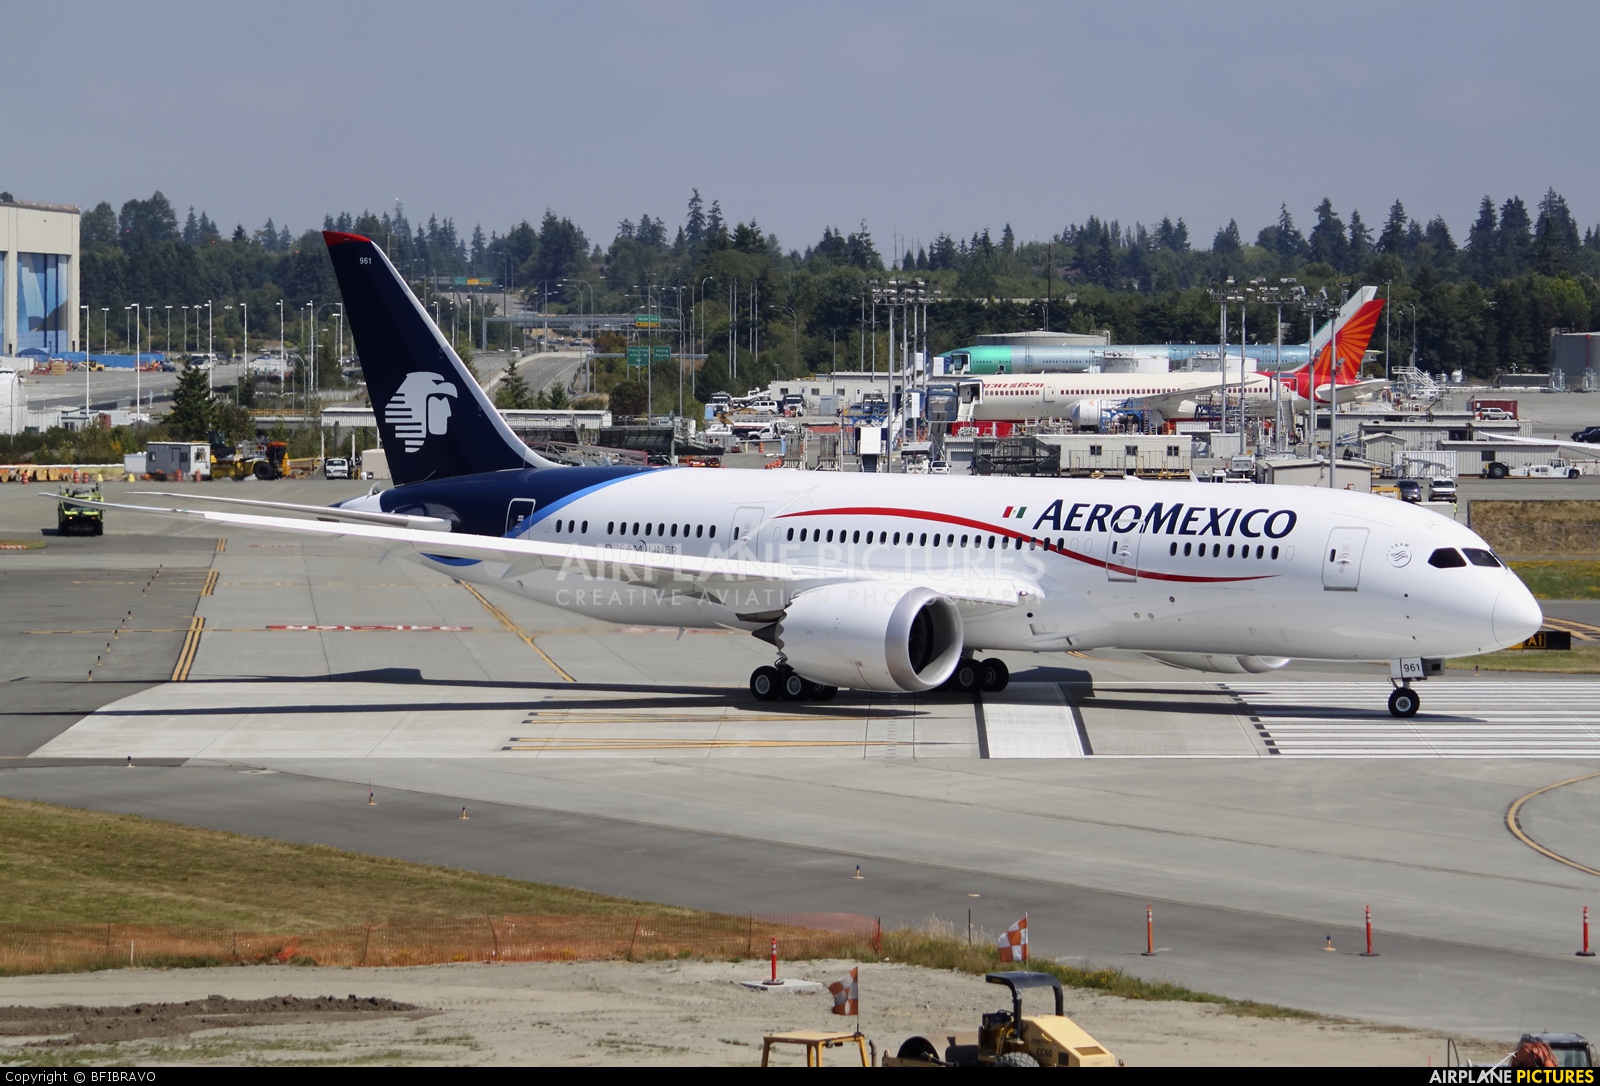 Aeromexico N961AM aircraft at Everett - Snohomish County / Paine Field